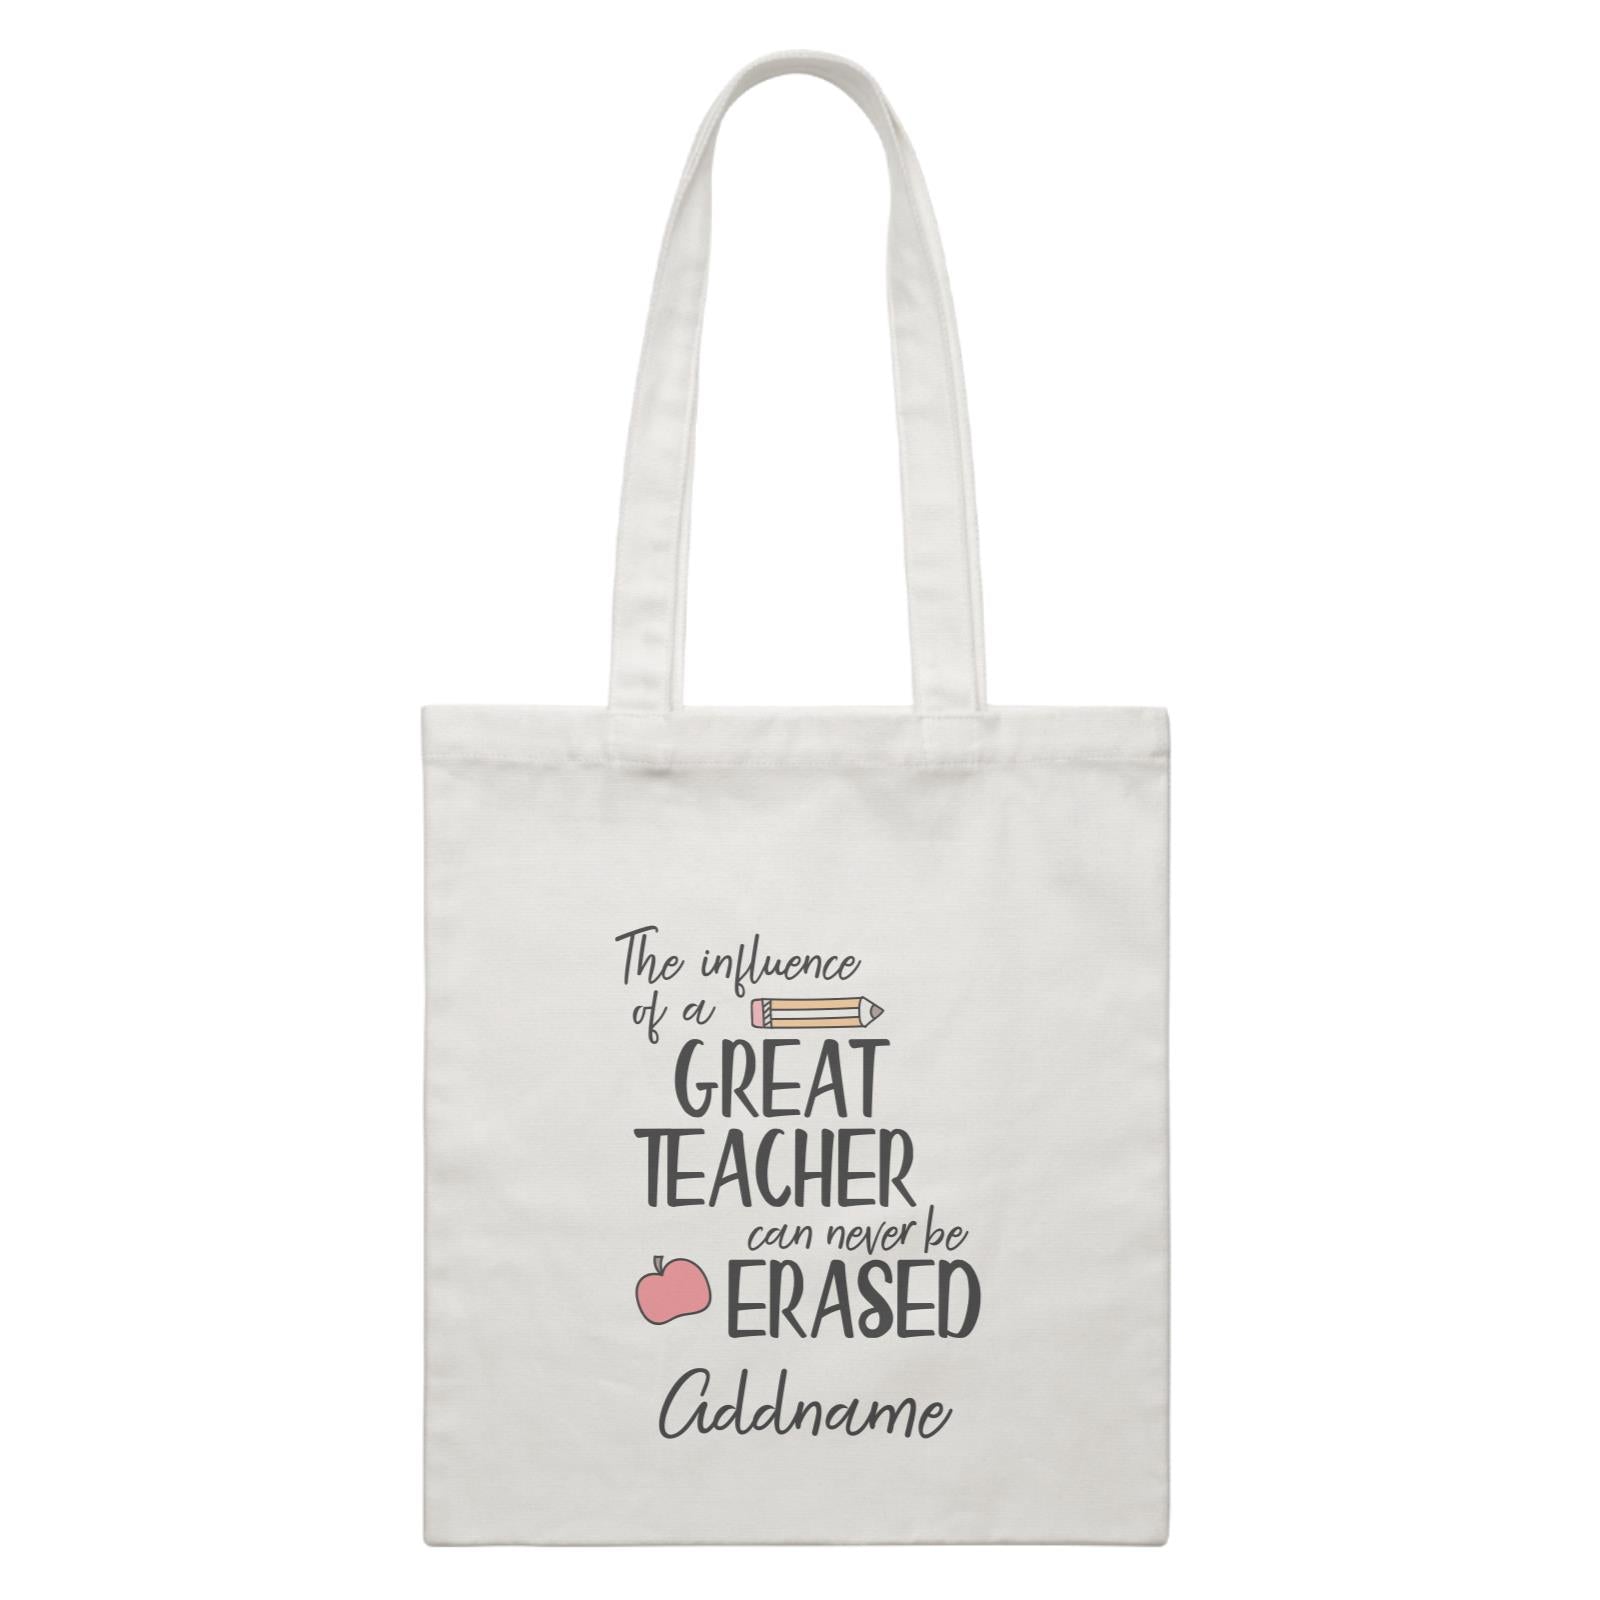 Teacher Quotes The Influence Of A Great Teacher Can Never Be Erased Addname White Canvas Bag